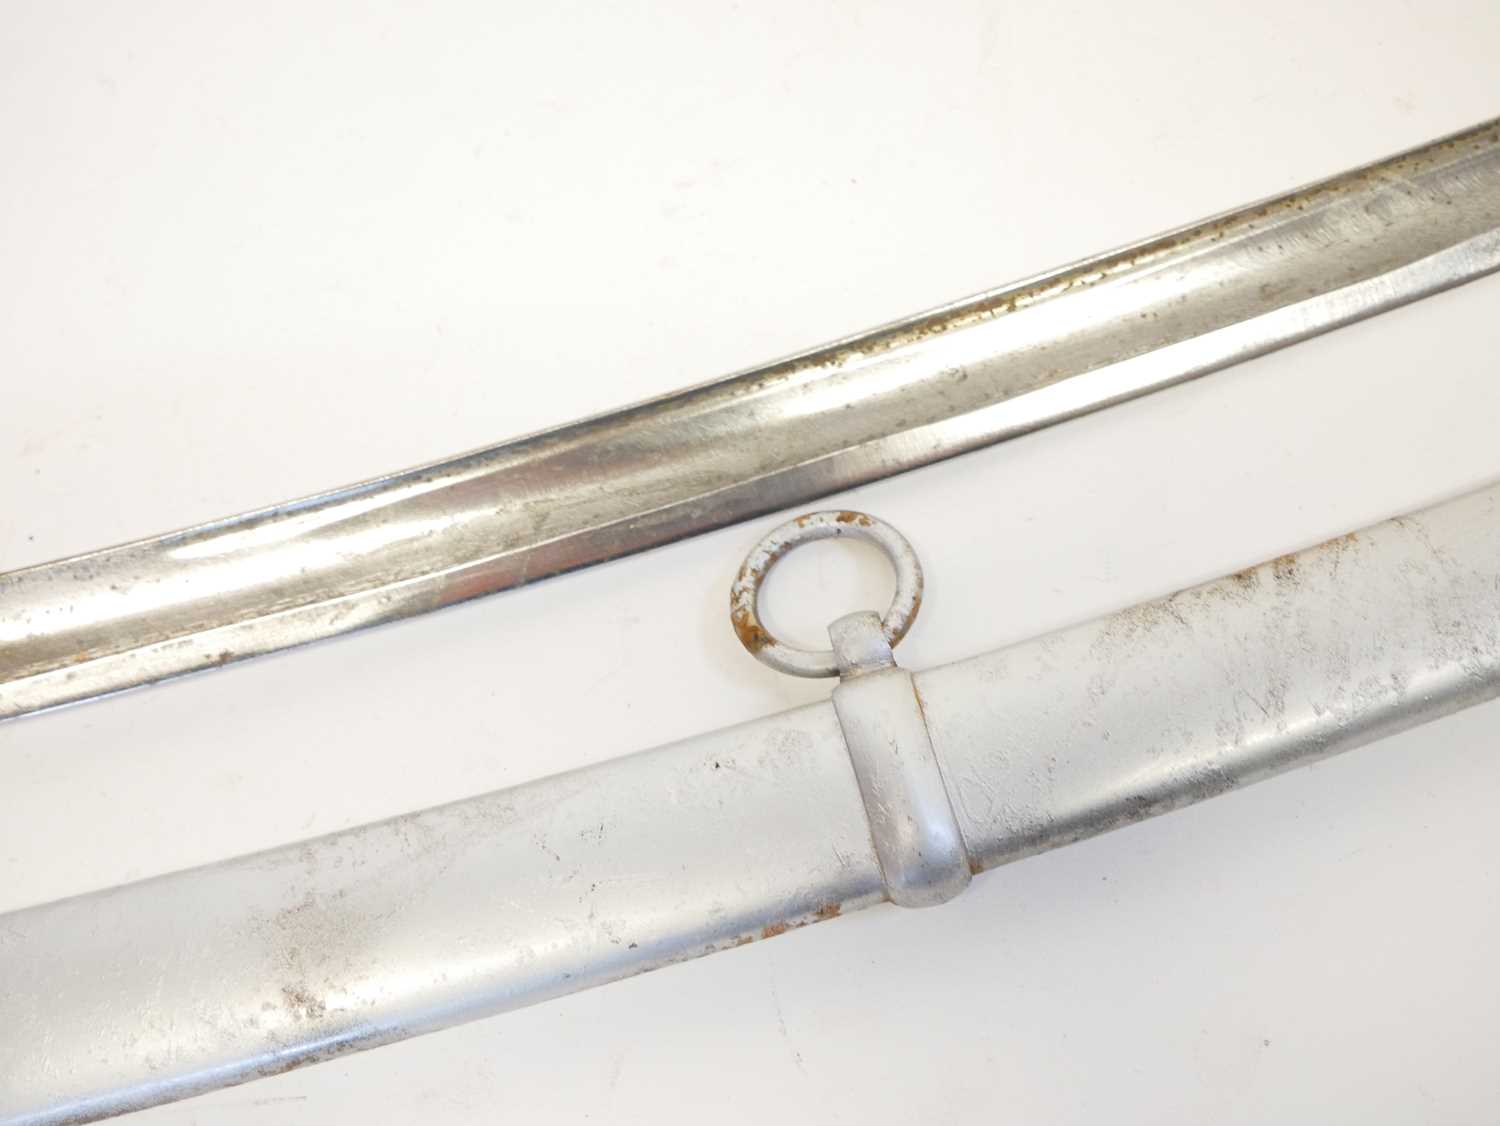 Reproduction US wrist breaker cavalry sabre and scabbard, curved fullered blade with brass guard and - Image 6 of 11